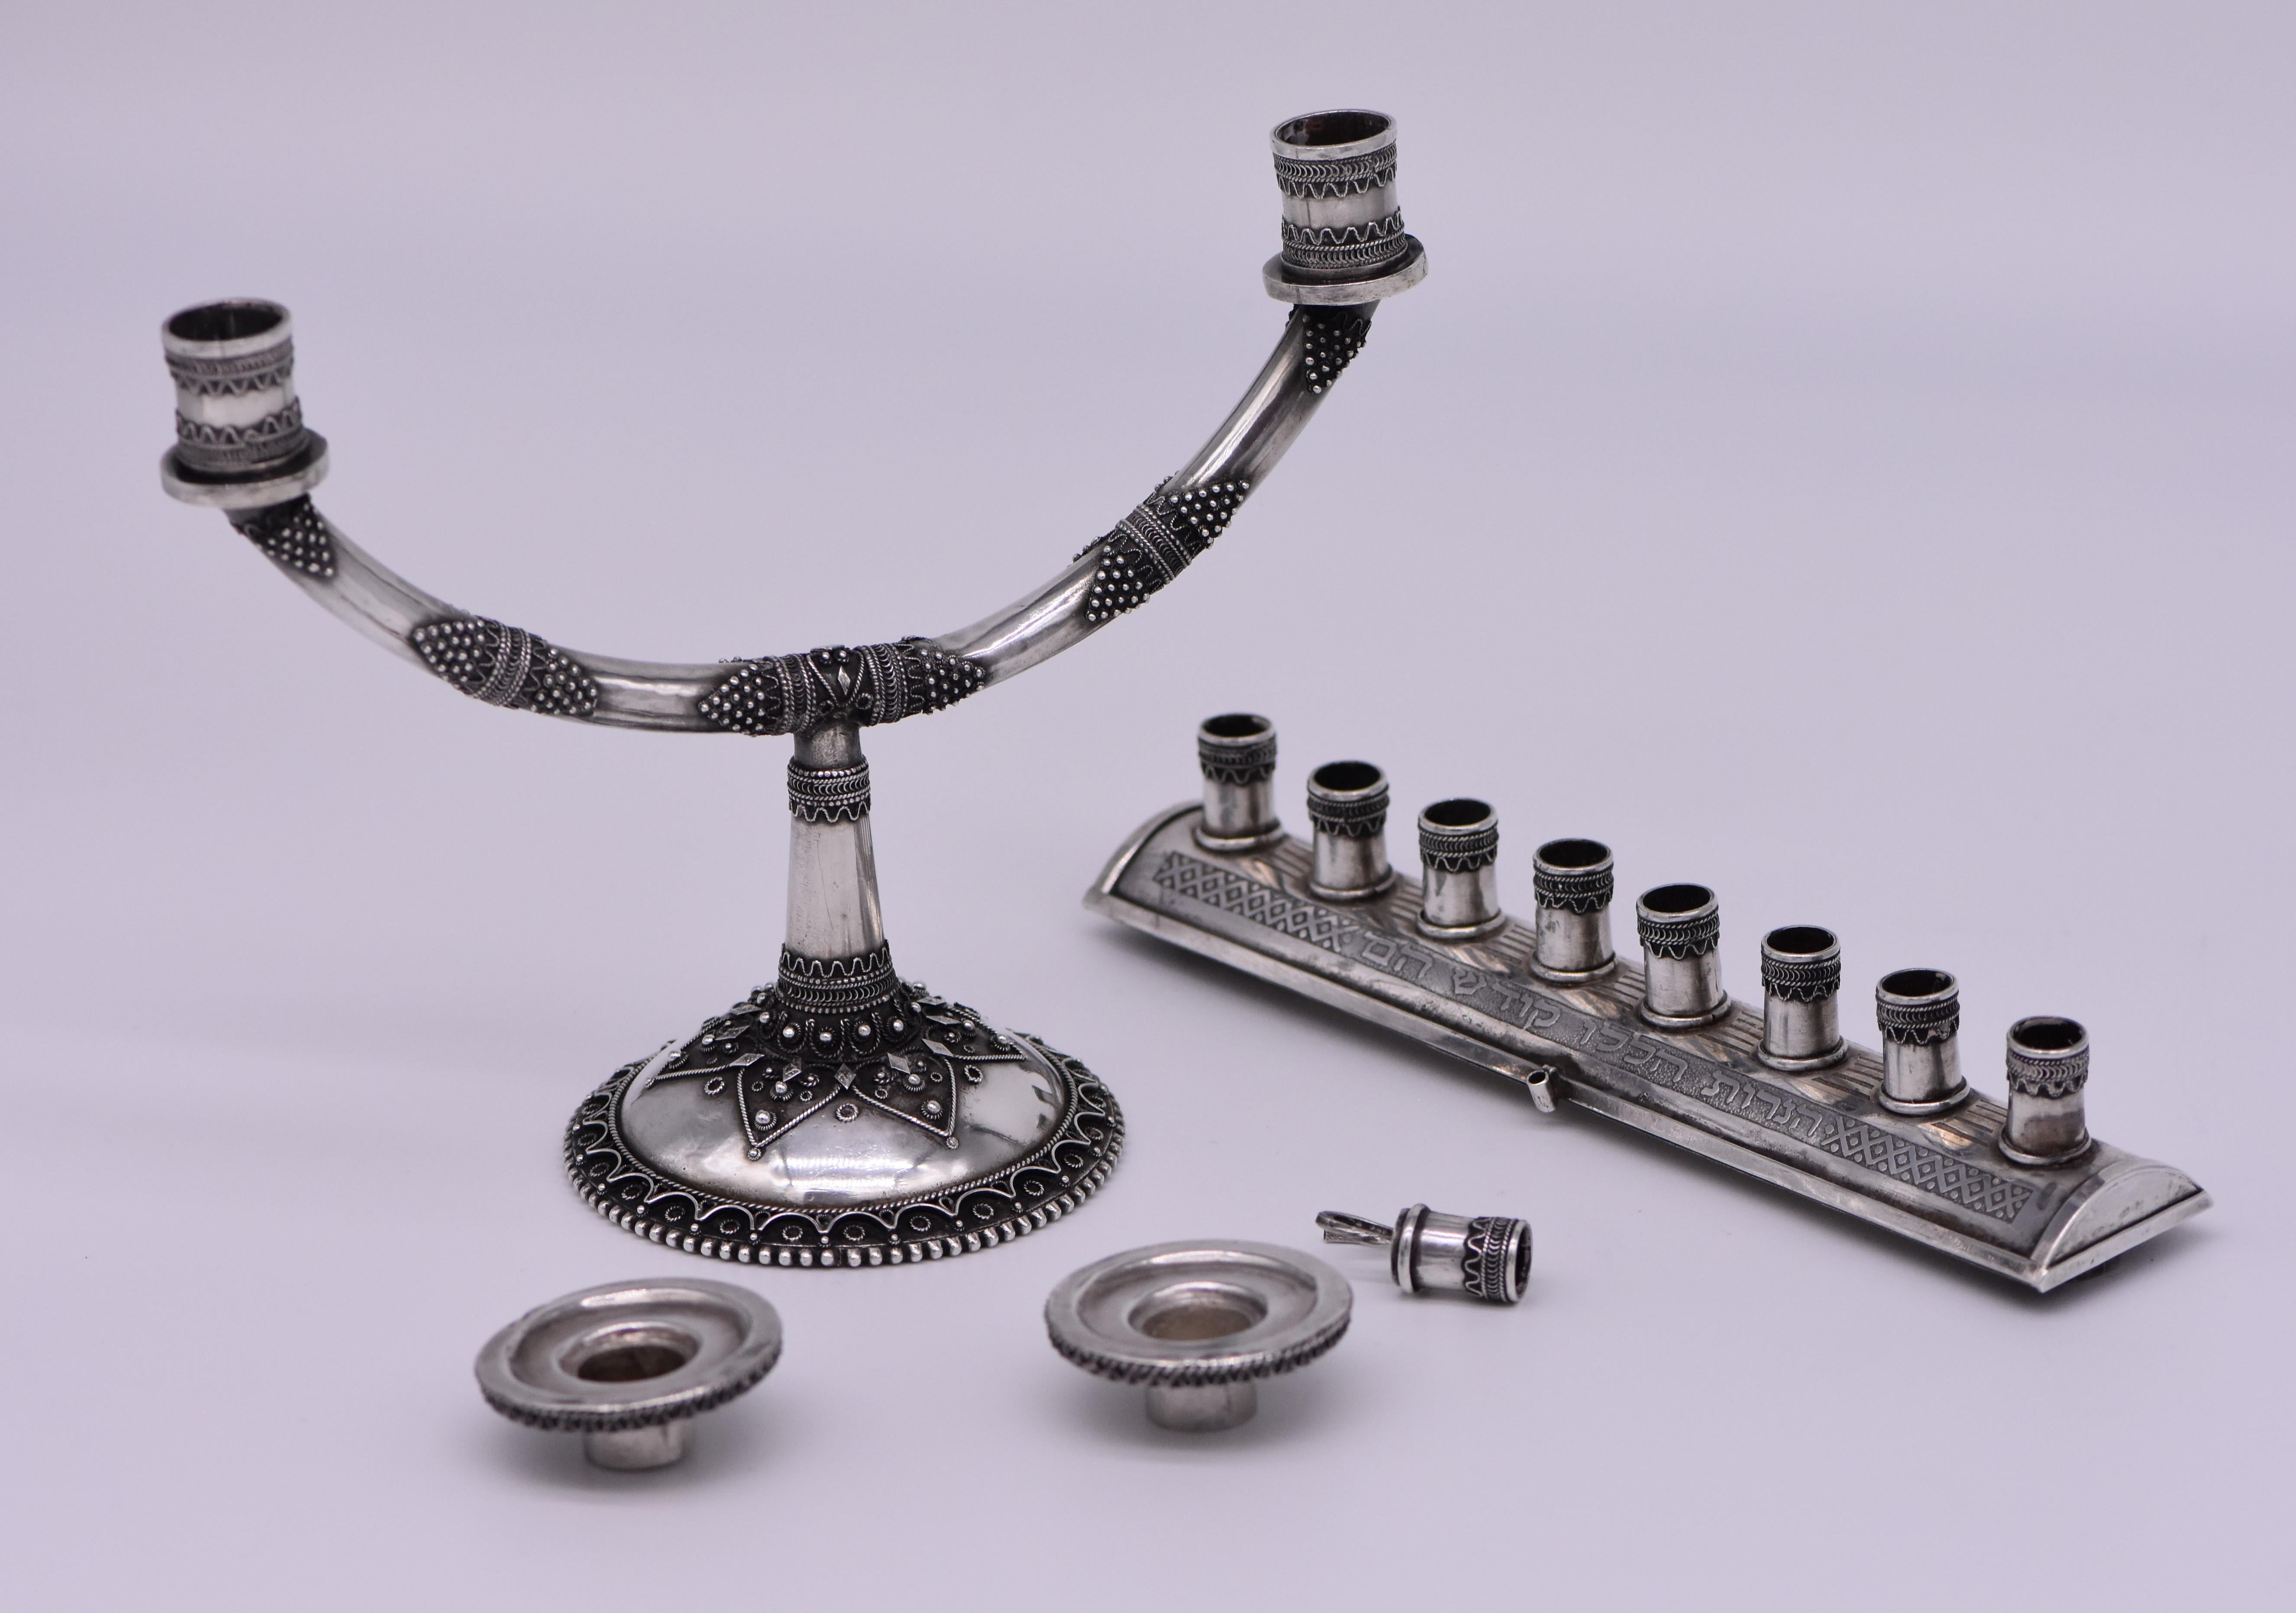 Handmade silver Hanukkah lamp Menorah by Bezalel. Decorated with filigree work, and with acid etched Hebrew text: 